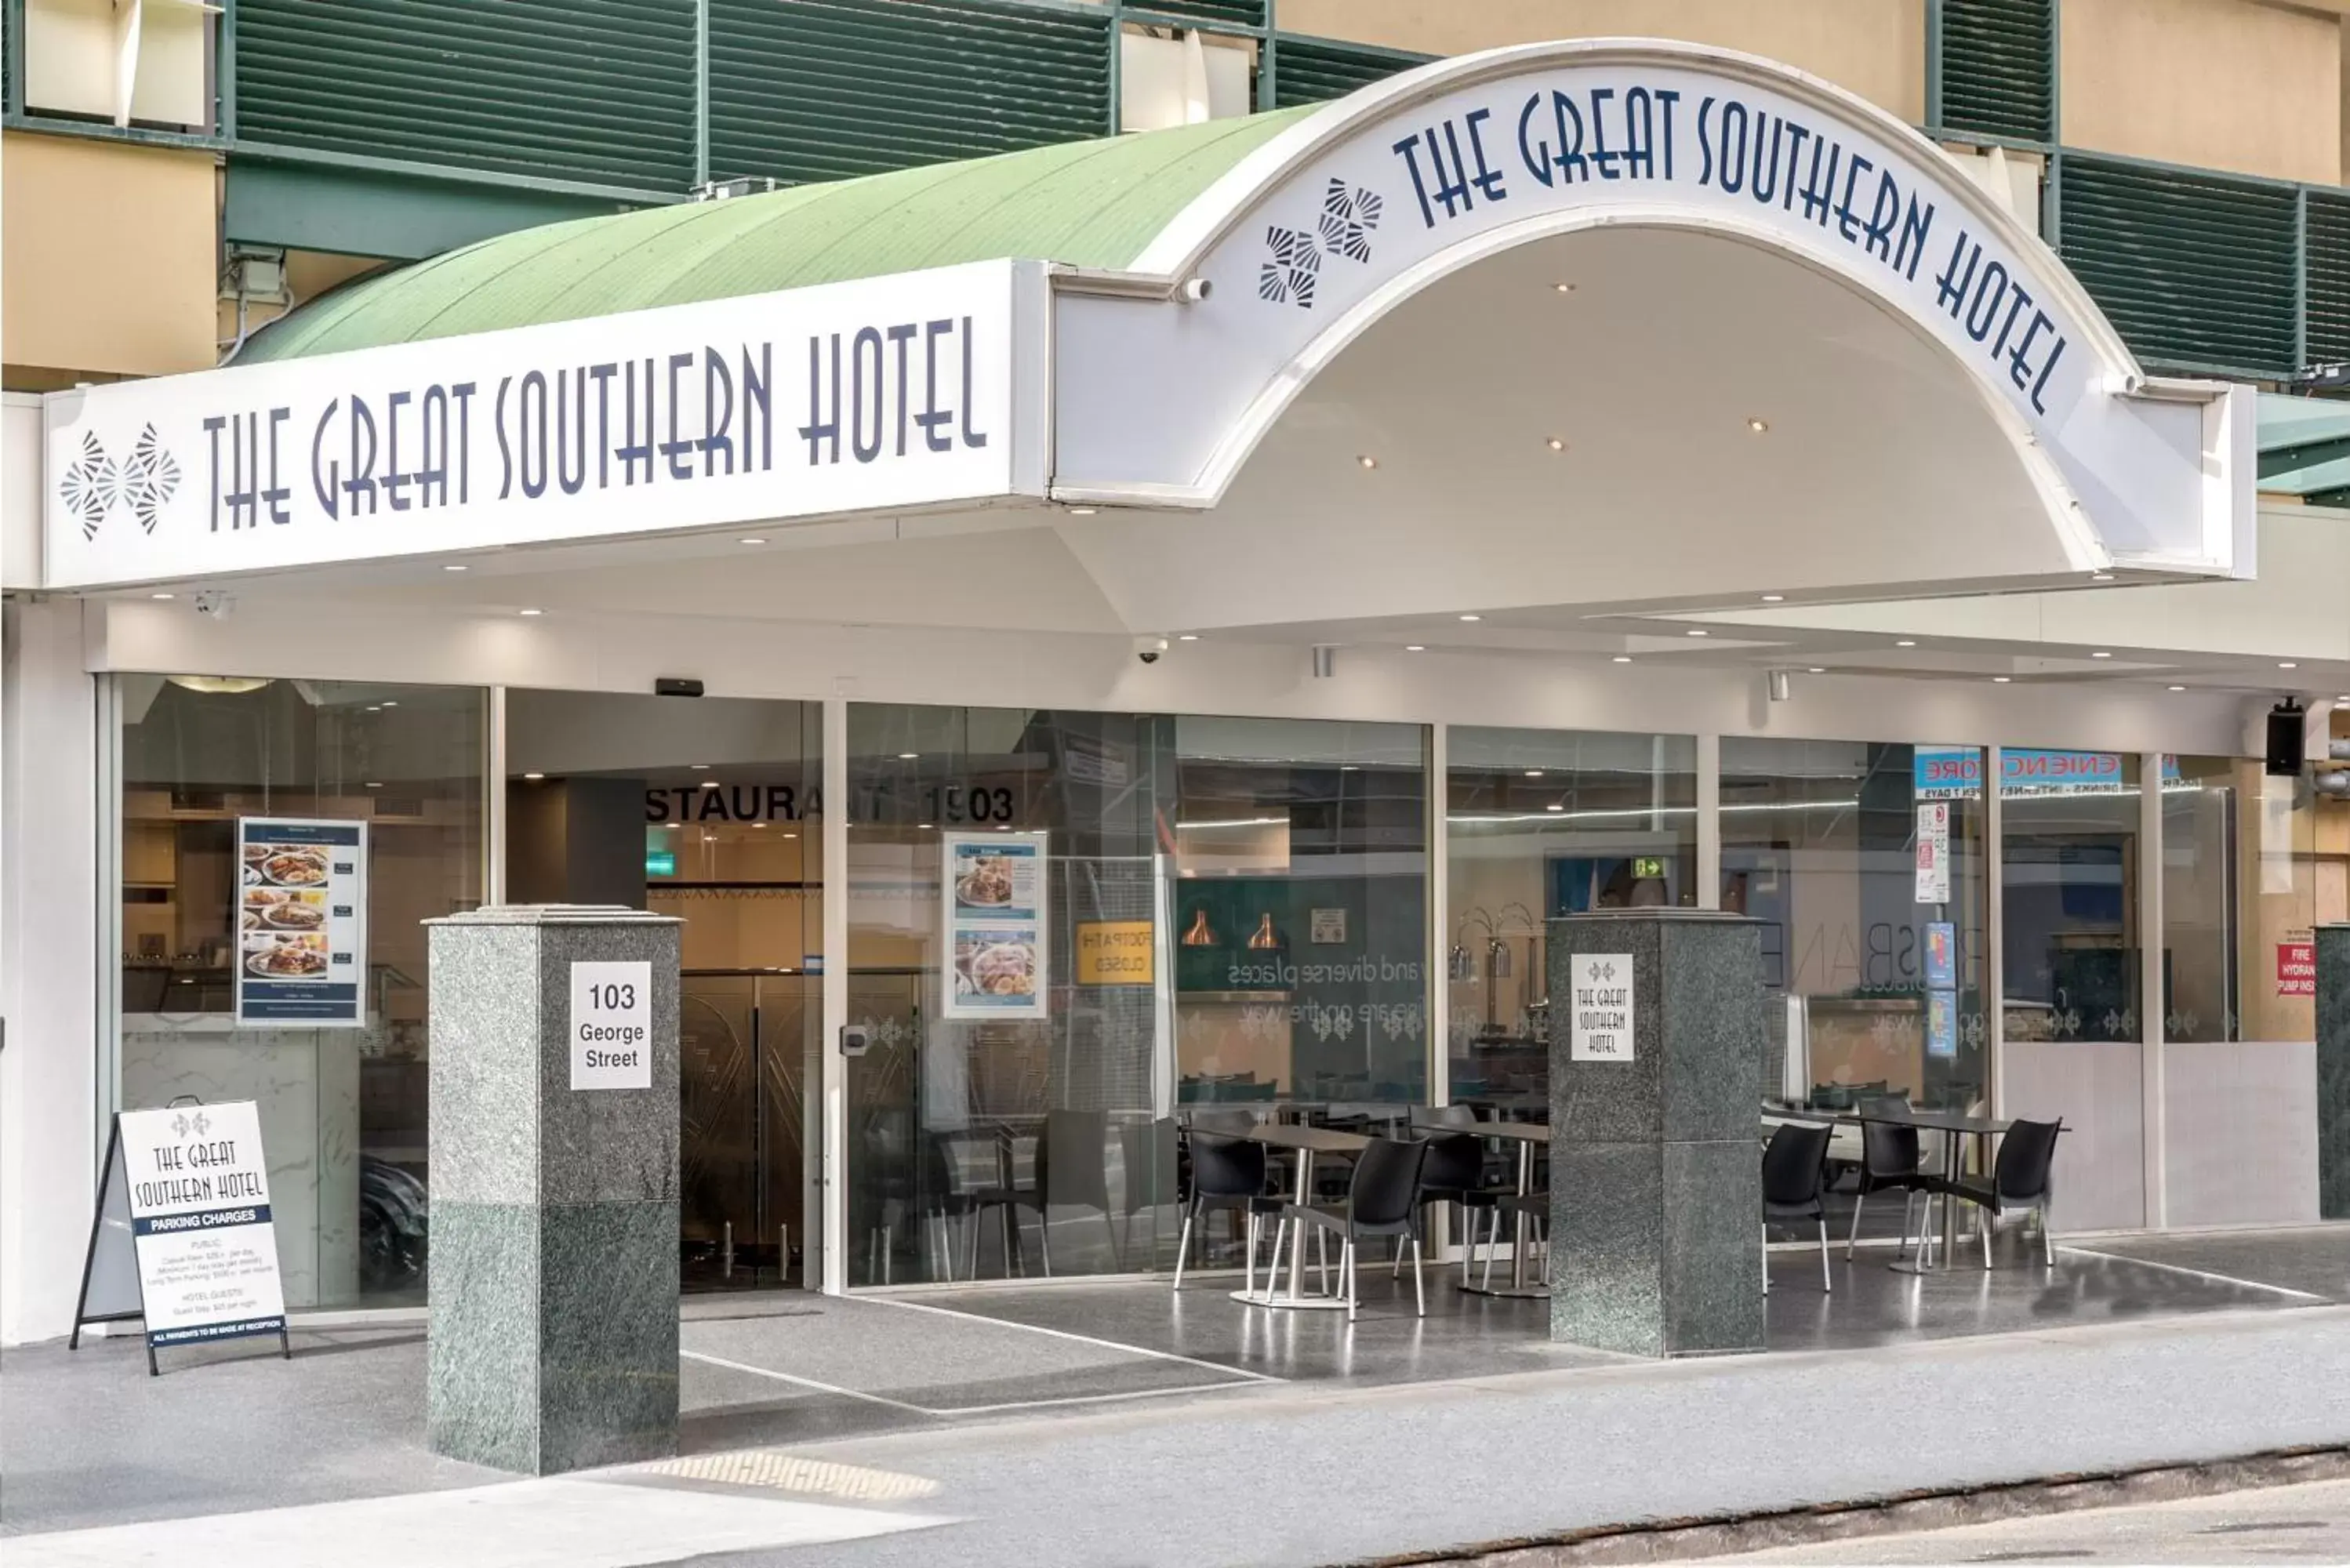 Property building in Great Southern Hotel Brisbane